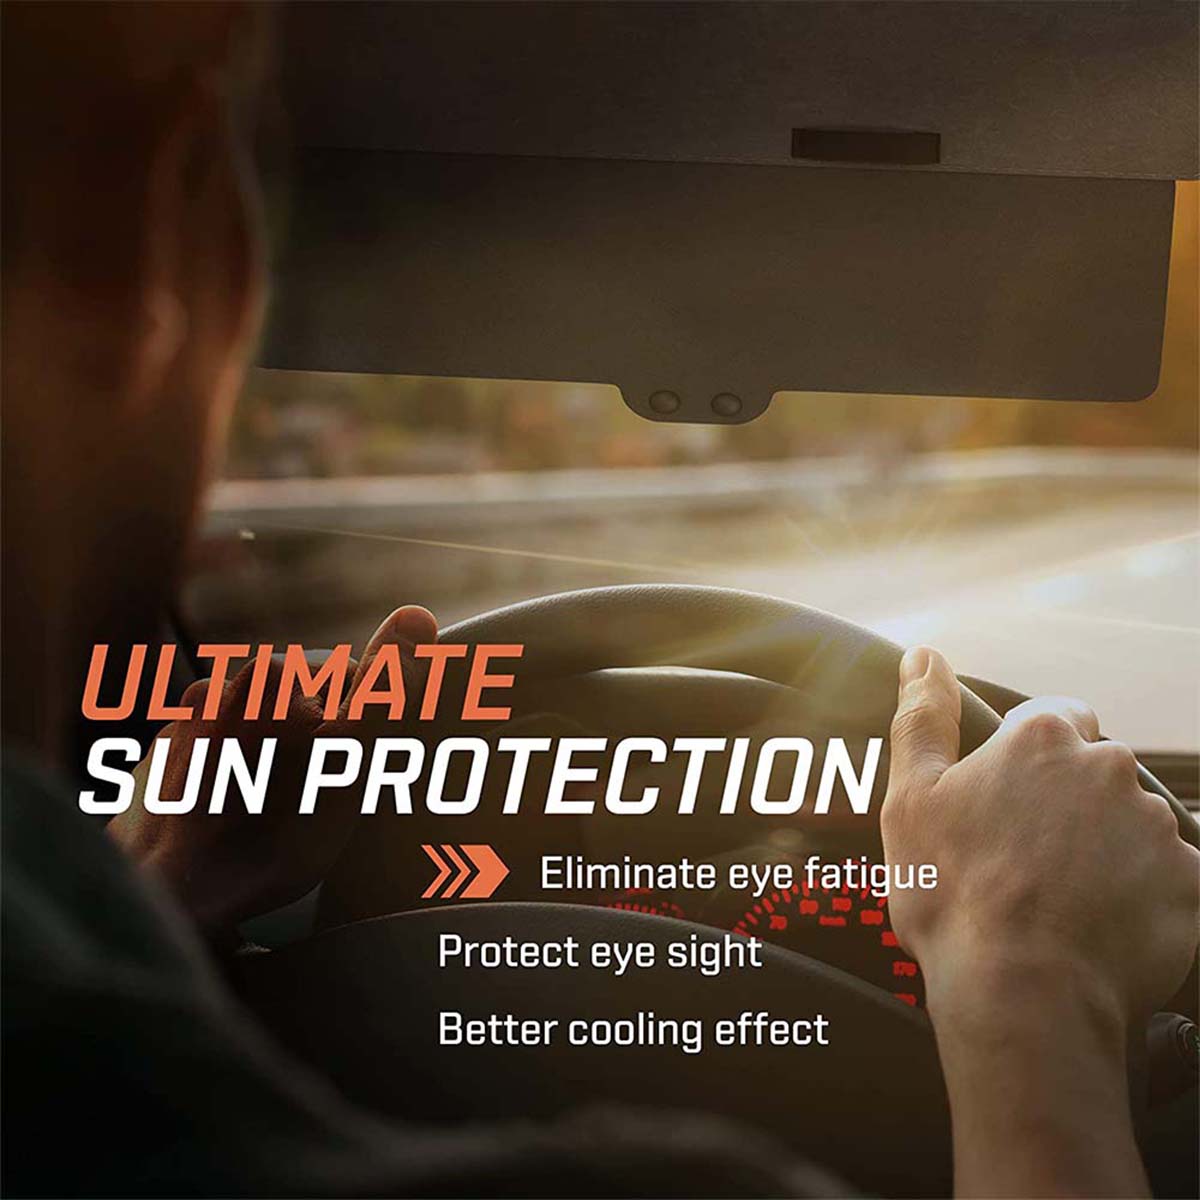 Delicate Leather Polarized Sun Visor Sunshade Extender for Car with Polycarbonate Lens, Custom For Your Cars, Anti-Glare Car Sun Visor Protects from Sun Glare, Snow Blindness, UV Rays, Universal for Cars, SUVs CH13999 - Delicate Leather